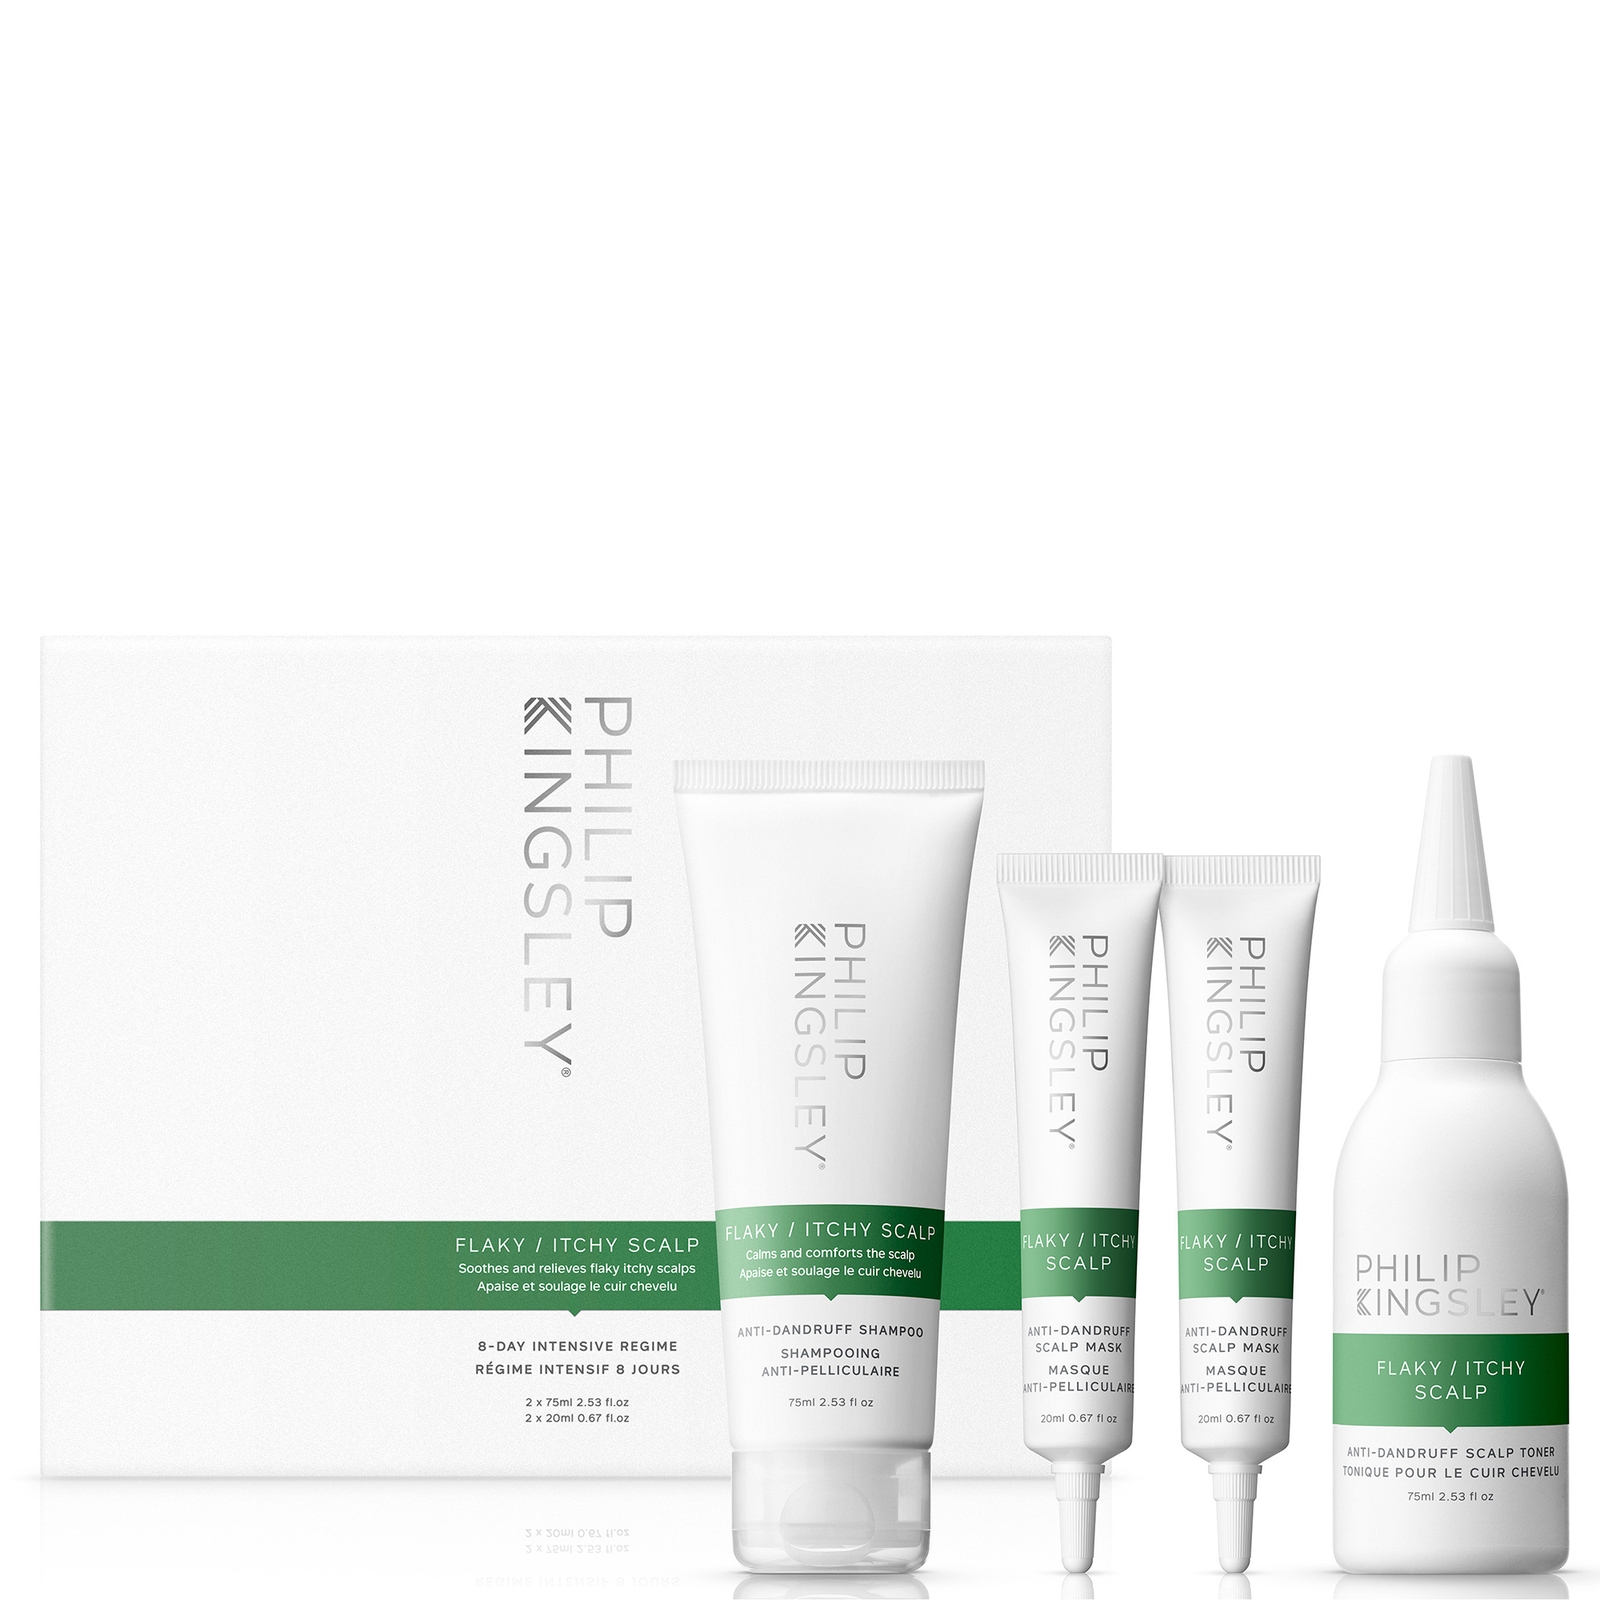 Philip Kingsley Flaky/Itchy Scalp 8-Day Kit (Worth PS44)